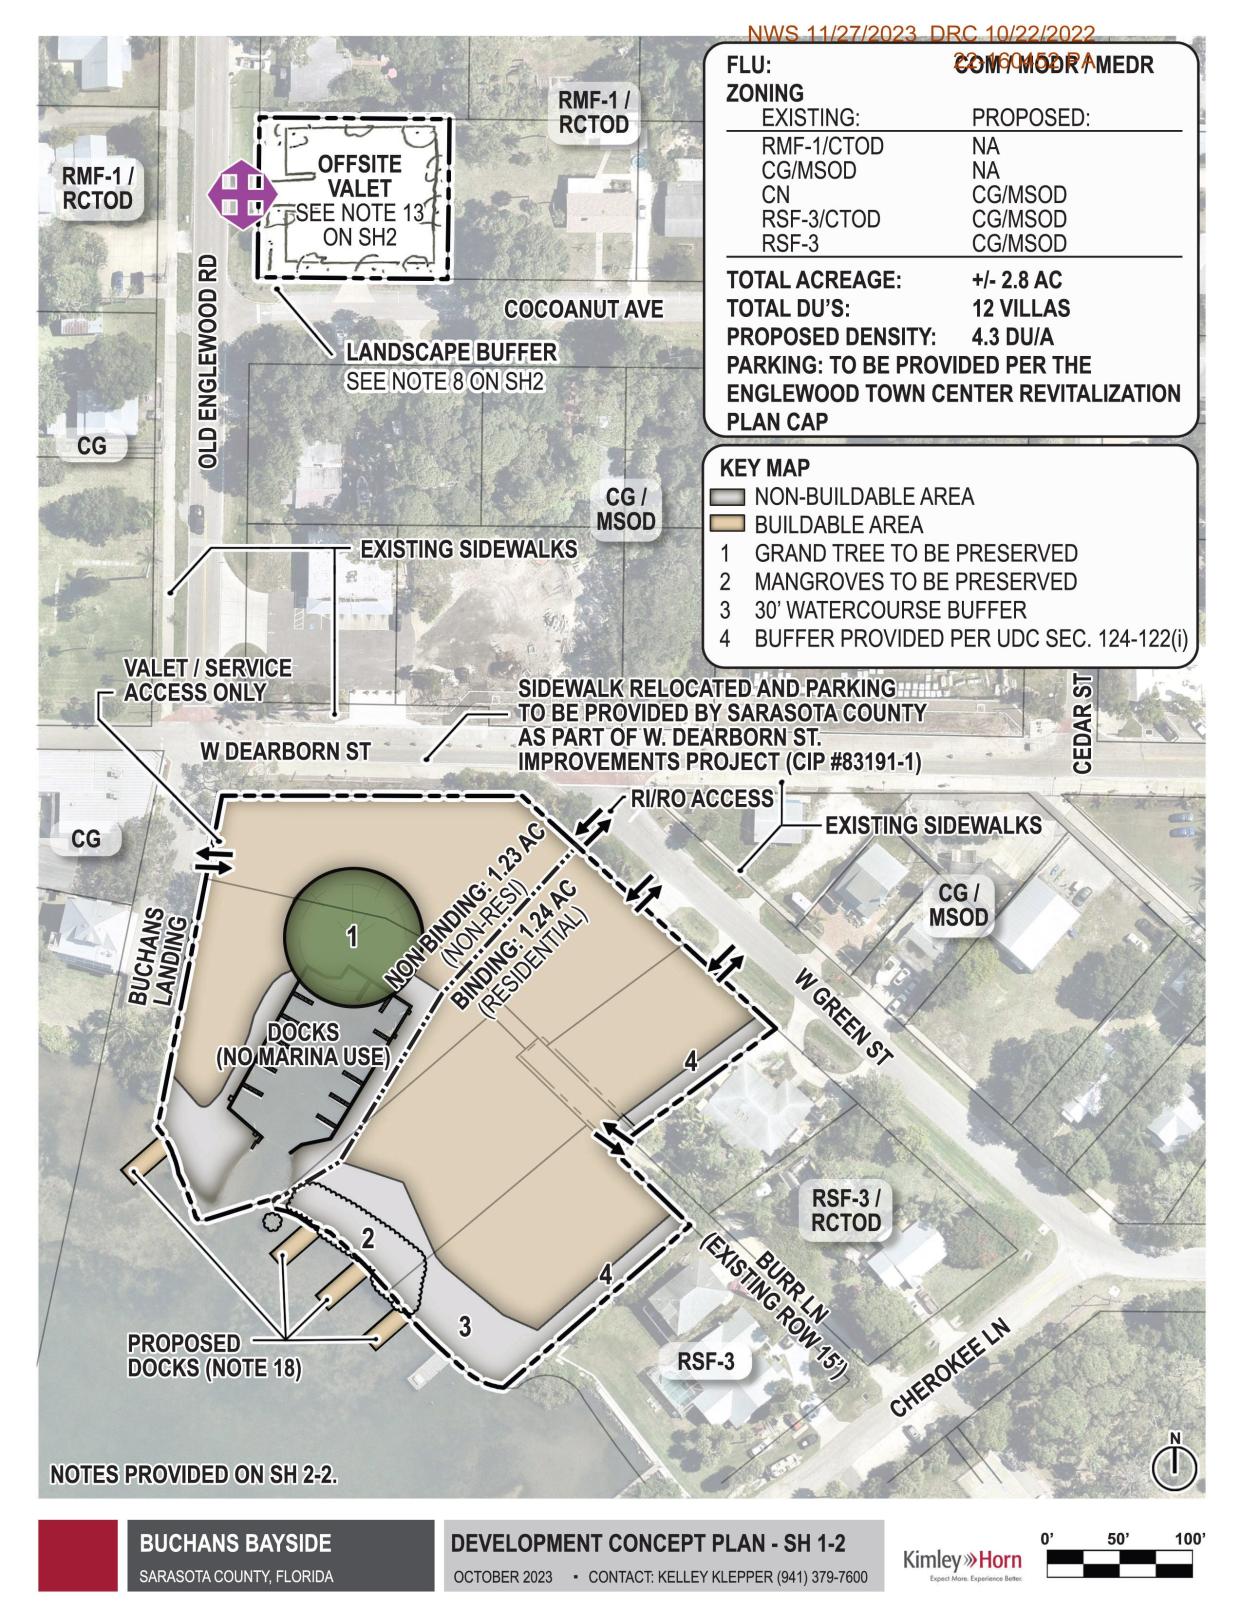 The map shows a non-binding site plan for the proposed mixed-use development Buchan's Bayside, which will include a destination restaurant and 12 paired villas.